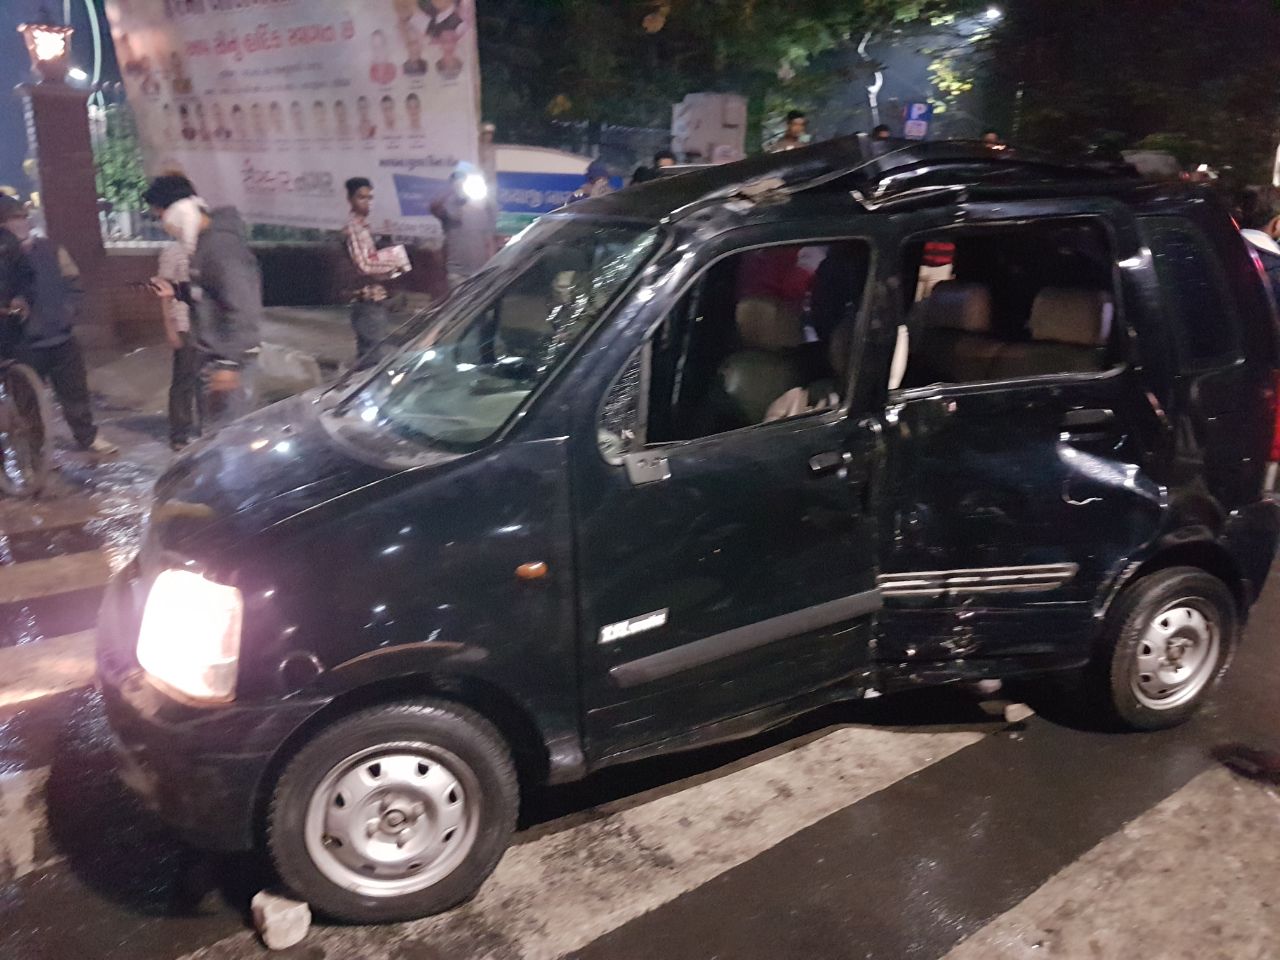 Local made liquor pouches laden car met with accident in Vadodara